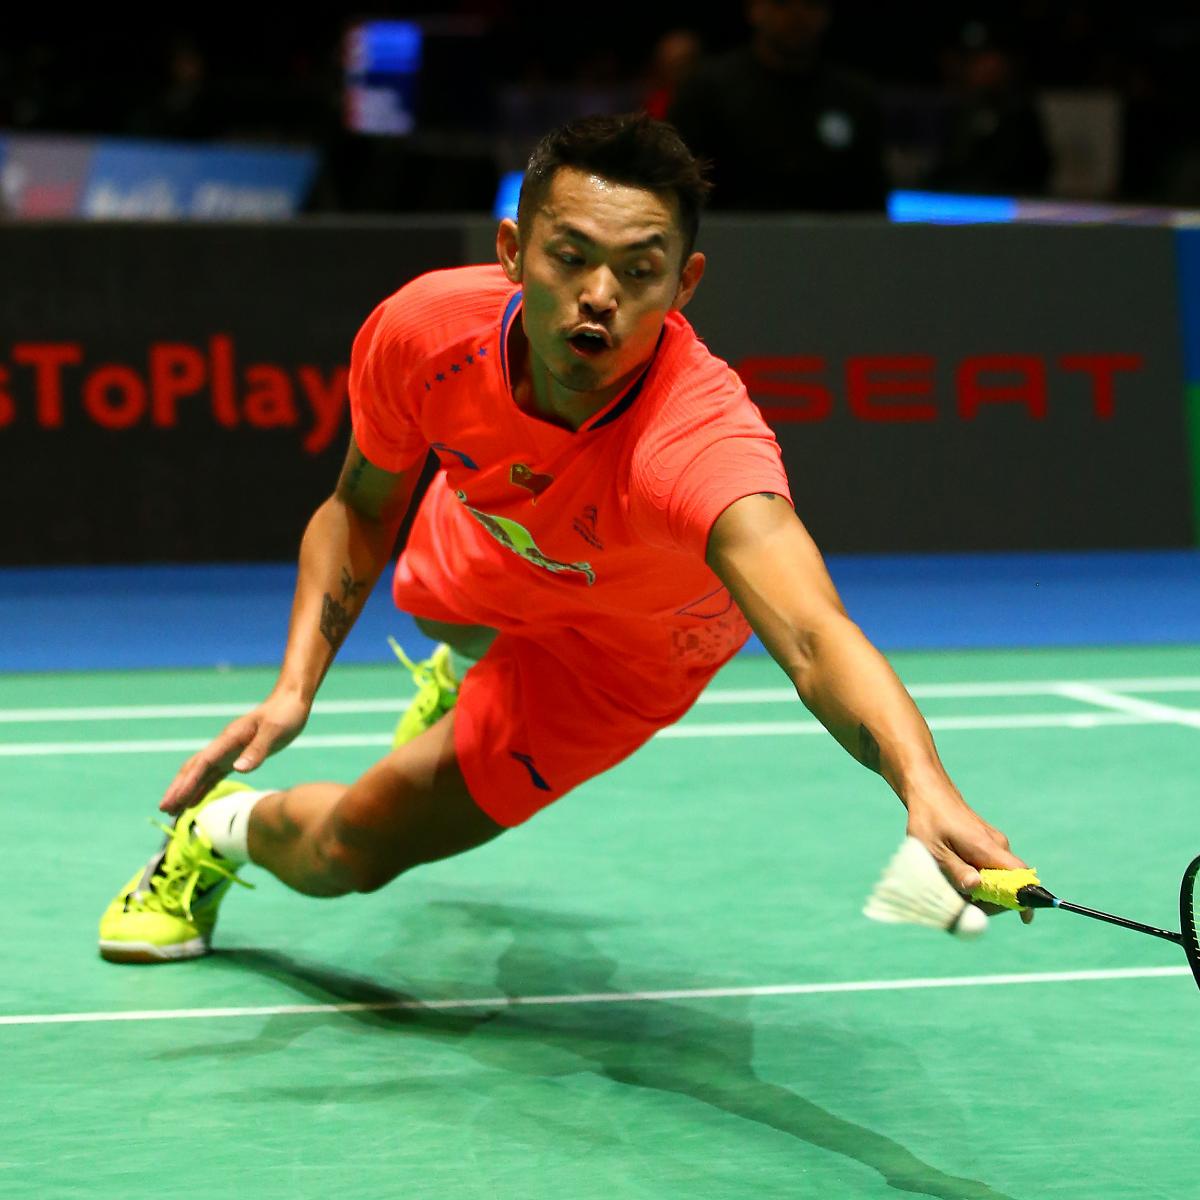 All England Open 2015 Badminton: Latest Results, Updated Schedule, Prize Money | Bleacher Report